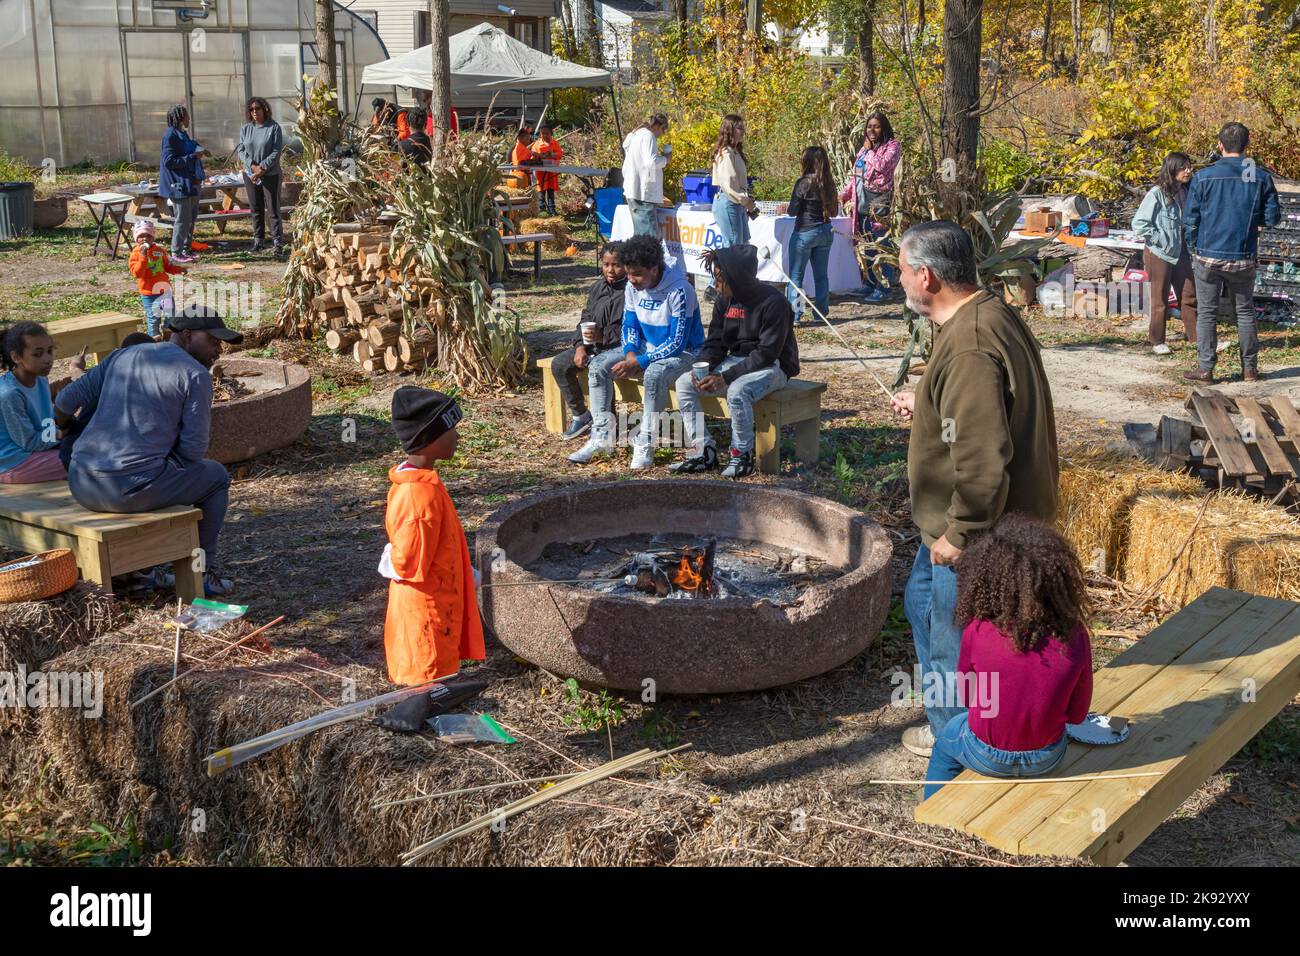 Detroit, Michigan - A fall festival in Detroit's Morningside neighborhood. The event was organized by the Motor City Grounds Crew. Stock Photo